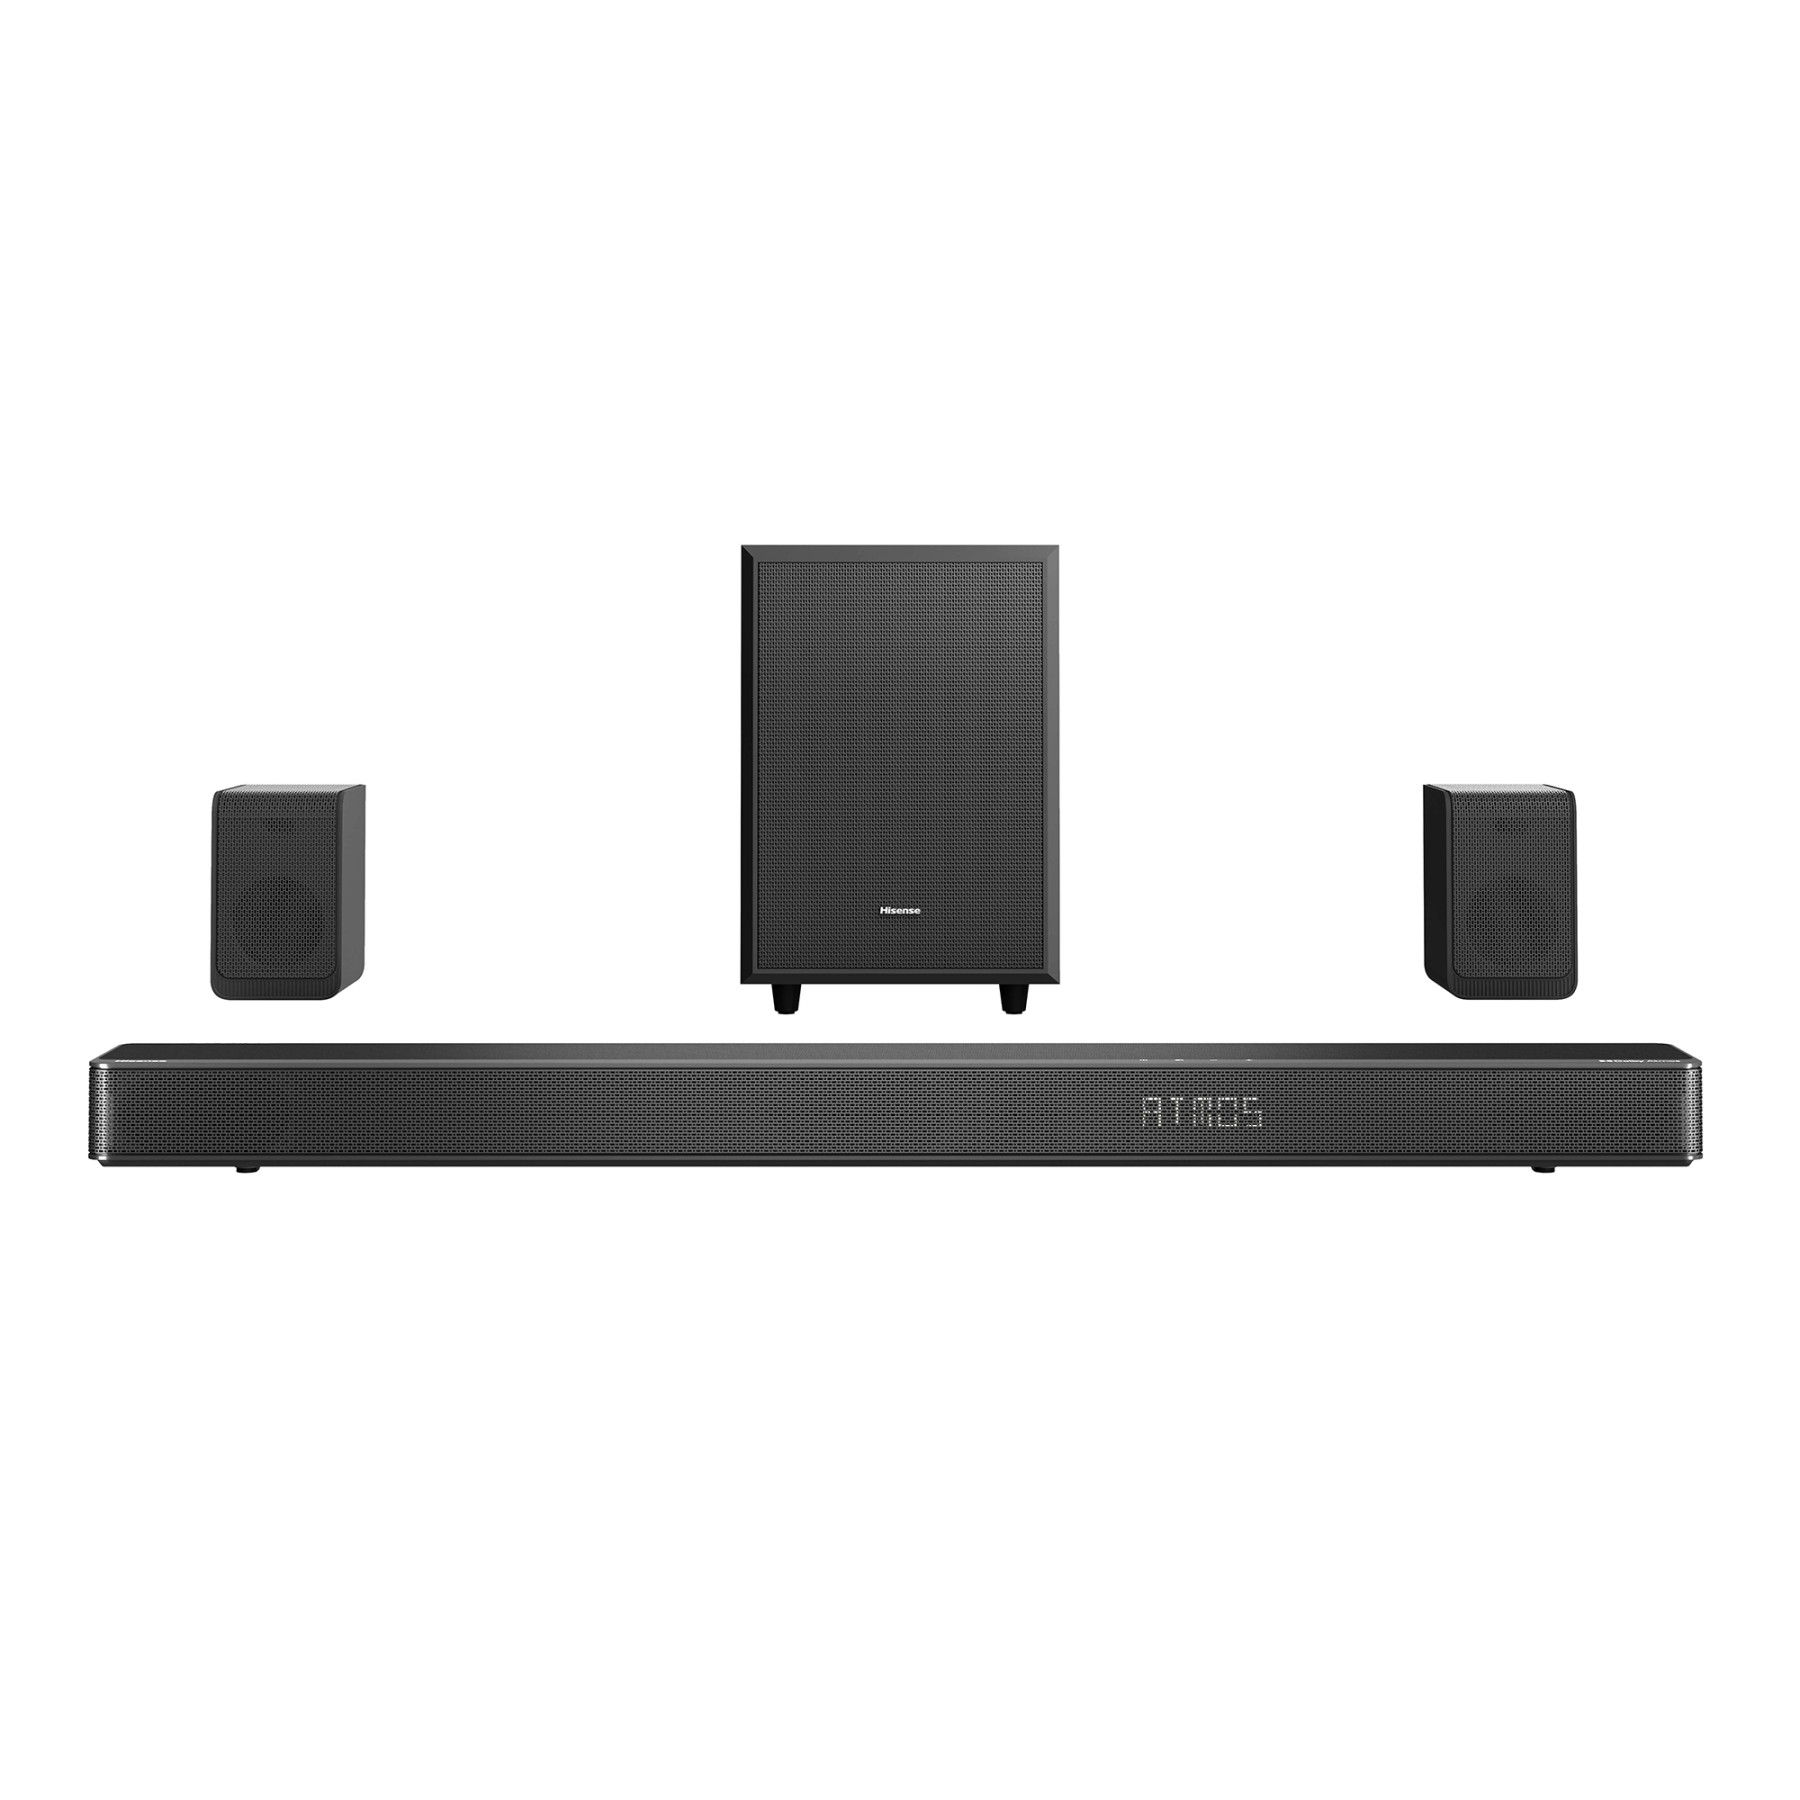 Hisense AX-5120G 5.1.2CH 420W Soundbar with Wireless Subwoofer - deluxe.com.ng